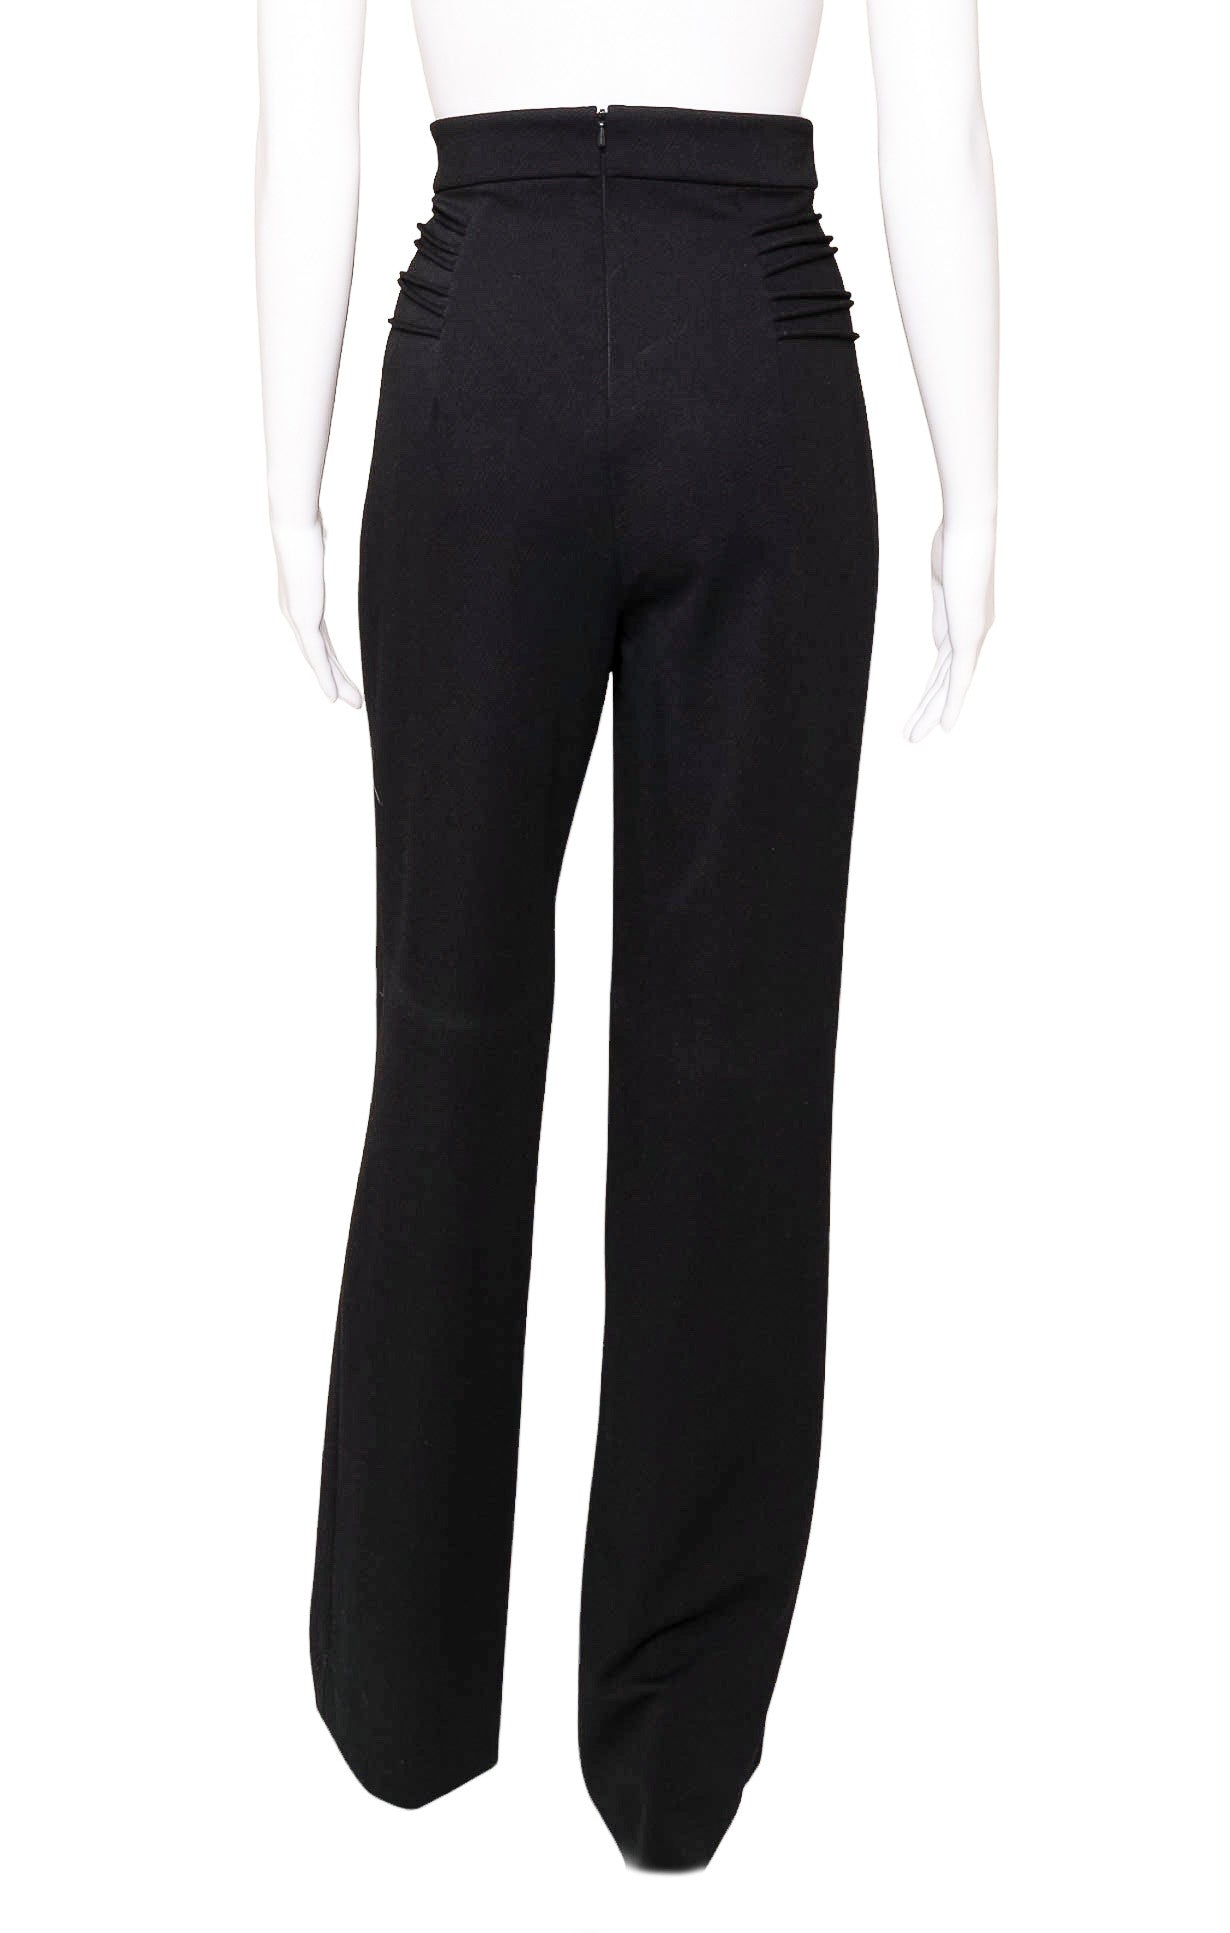 CUSHNIE ET OCHS (RARE & NEW) with tags Pants Size: US 6